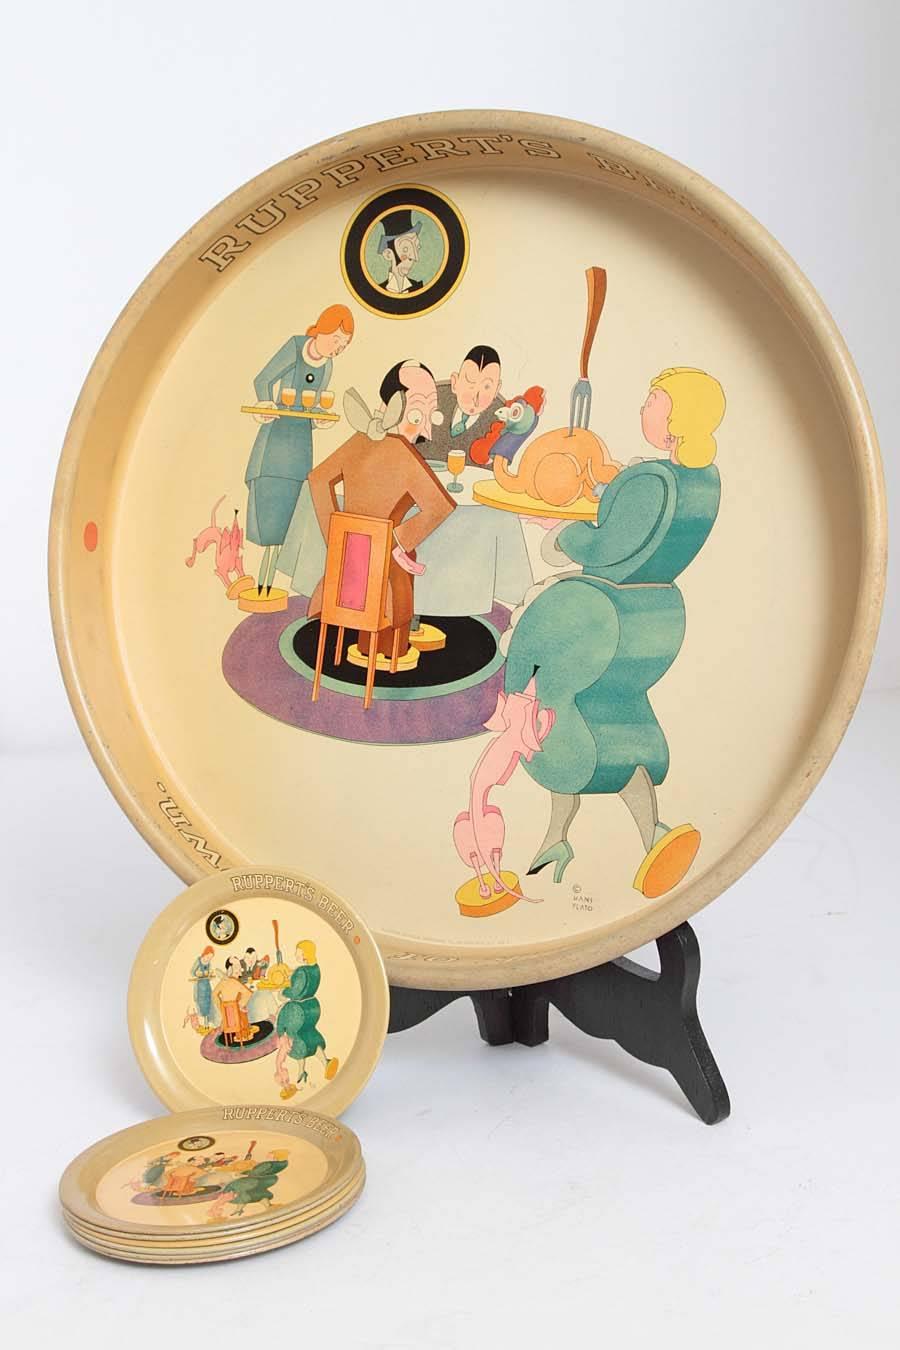 American Cubist Jazz Age Cocktail Tray or Tip Coaster Collection Ruppert's Beer For Sale